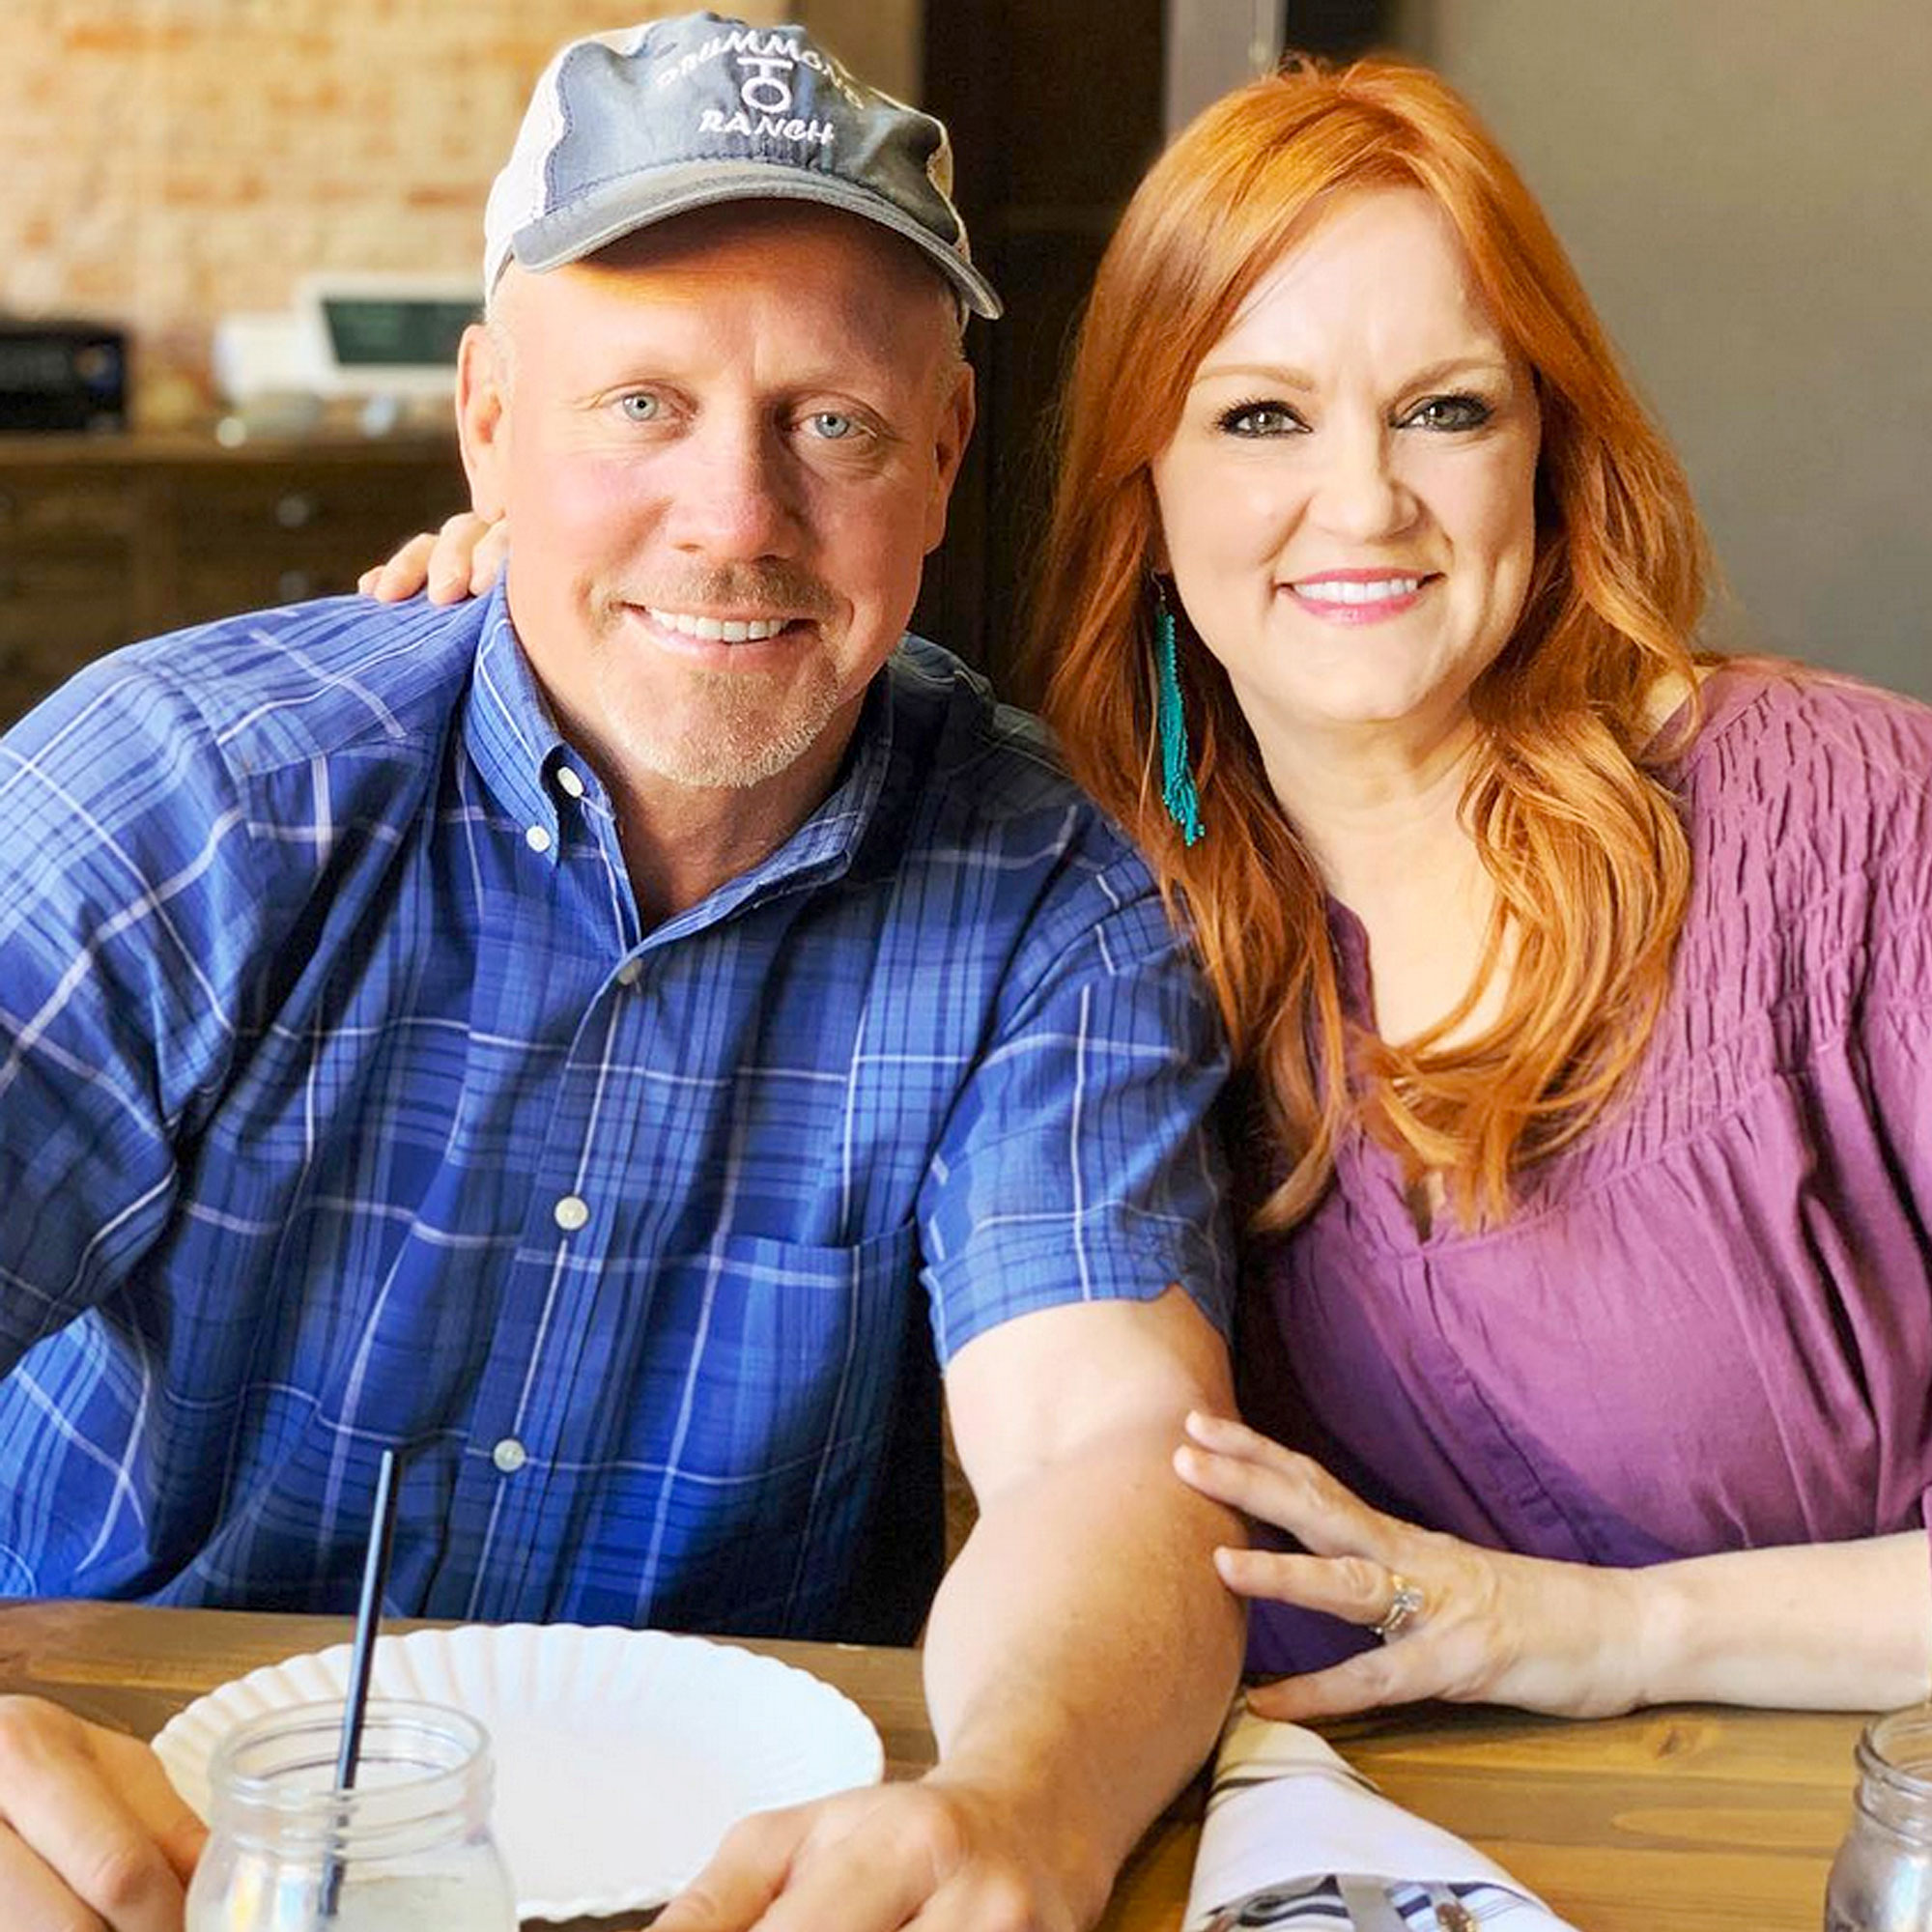 Ree Drummond Shares Update on Family Members After Truck Collision